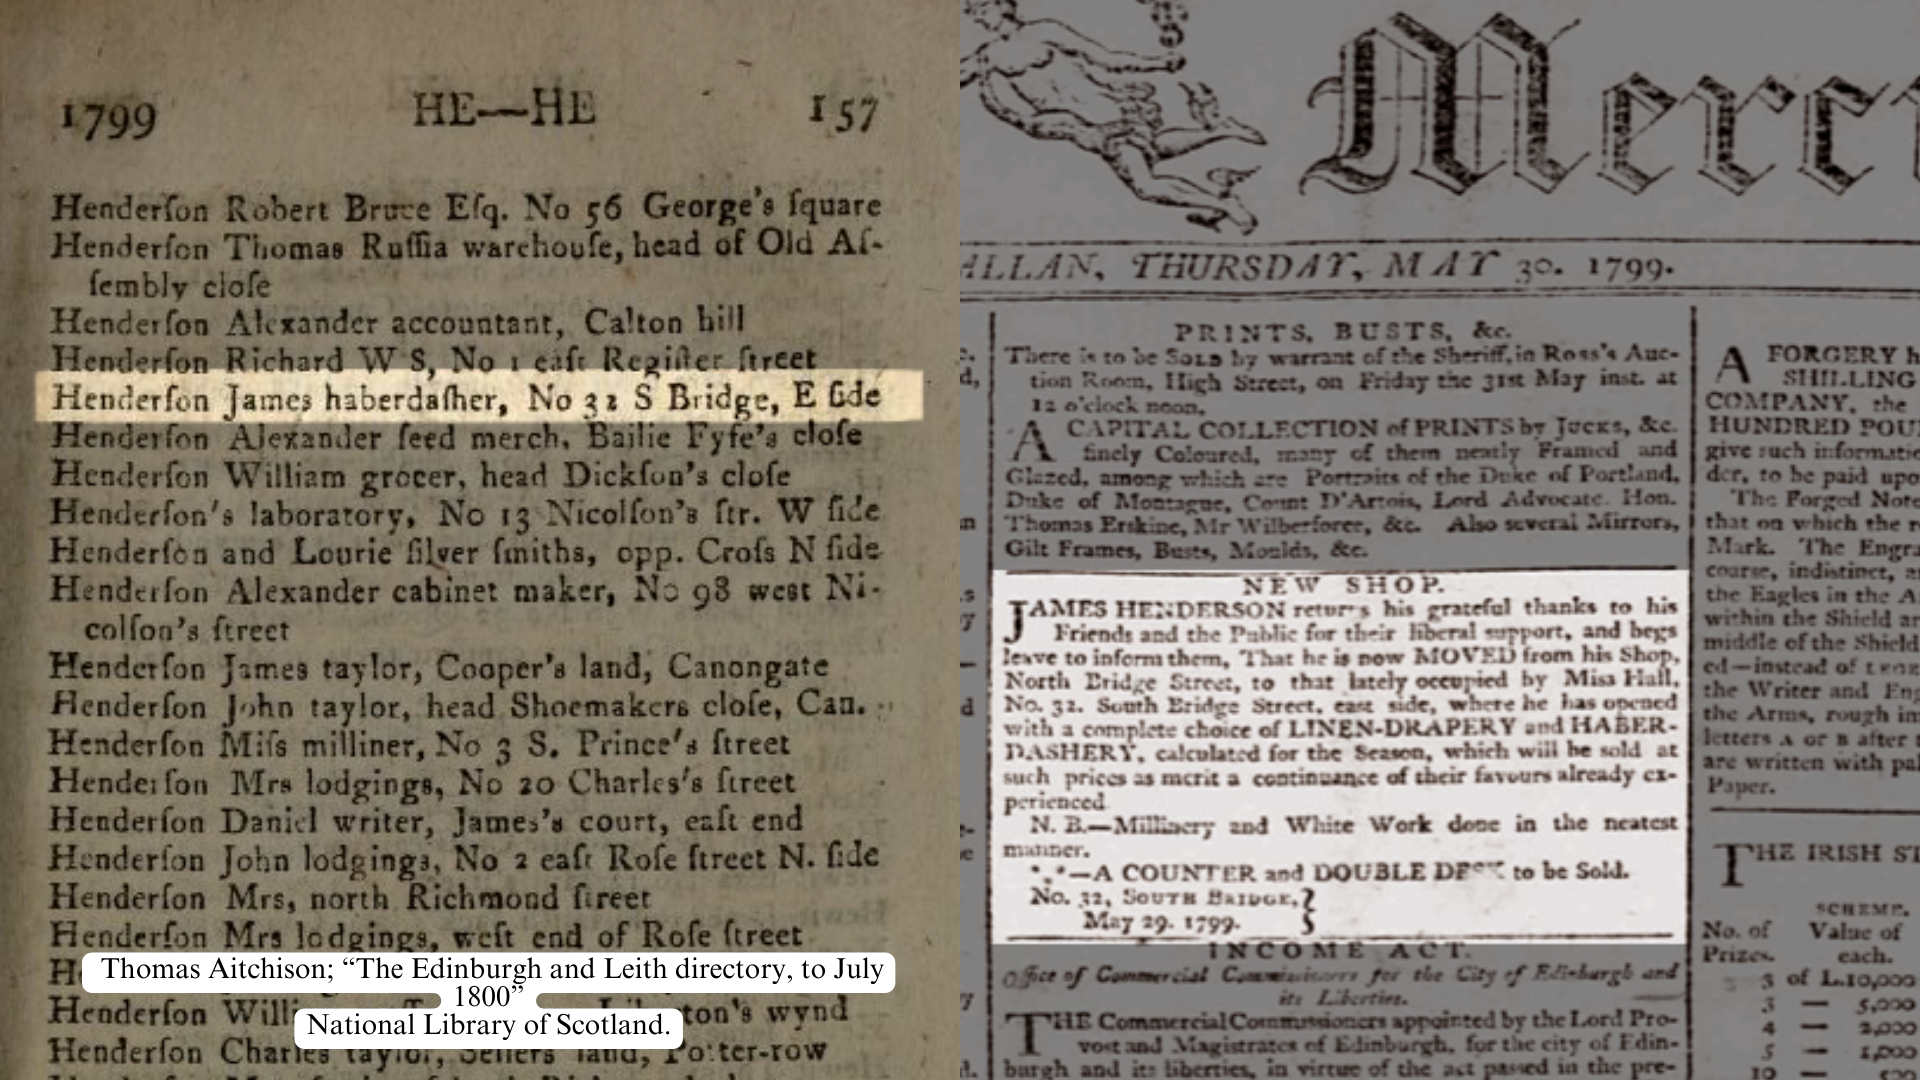 Two archive clippings: on the left page 157 from a street directory with the entry Henderson James haberdasher, No 32 S. Bridge. E. side highlighted and the text ‘Thomas Aitchison; “The Edinburgh and Leith directory, to July 1800” National Library of Scotland’ at the bottom; and a page from the Caledonia Mercury from 30 May 1799 with a New Shop entry highlighted stating James Henderson has moved shop to South Bridge.